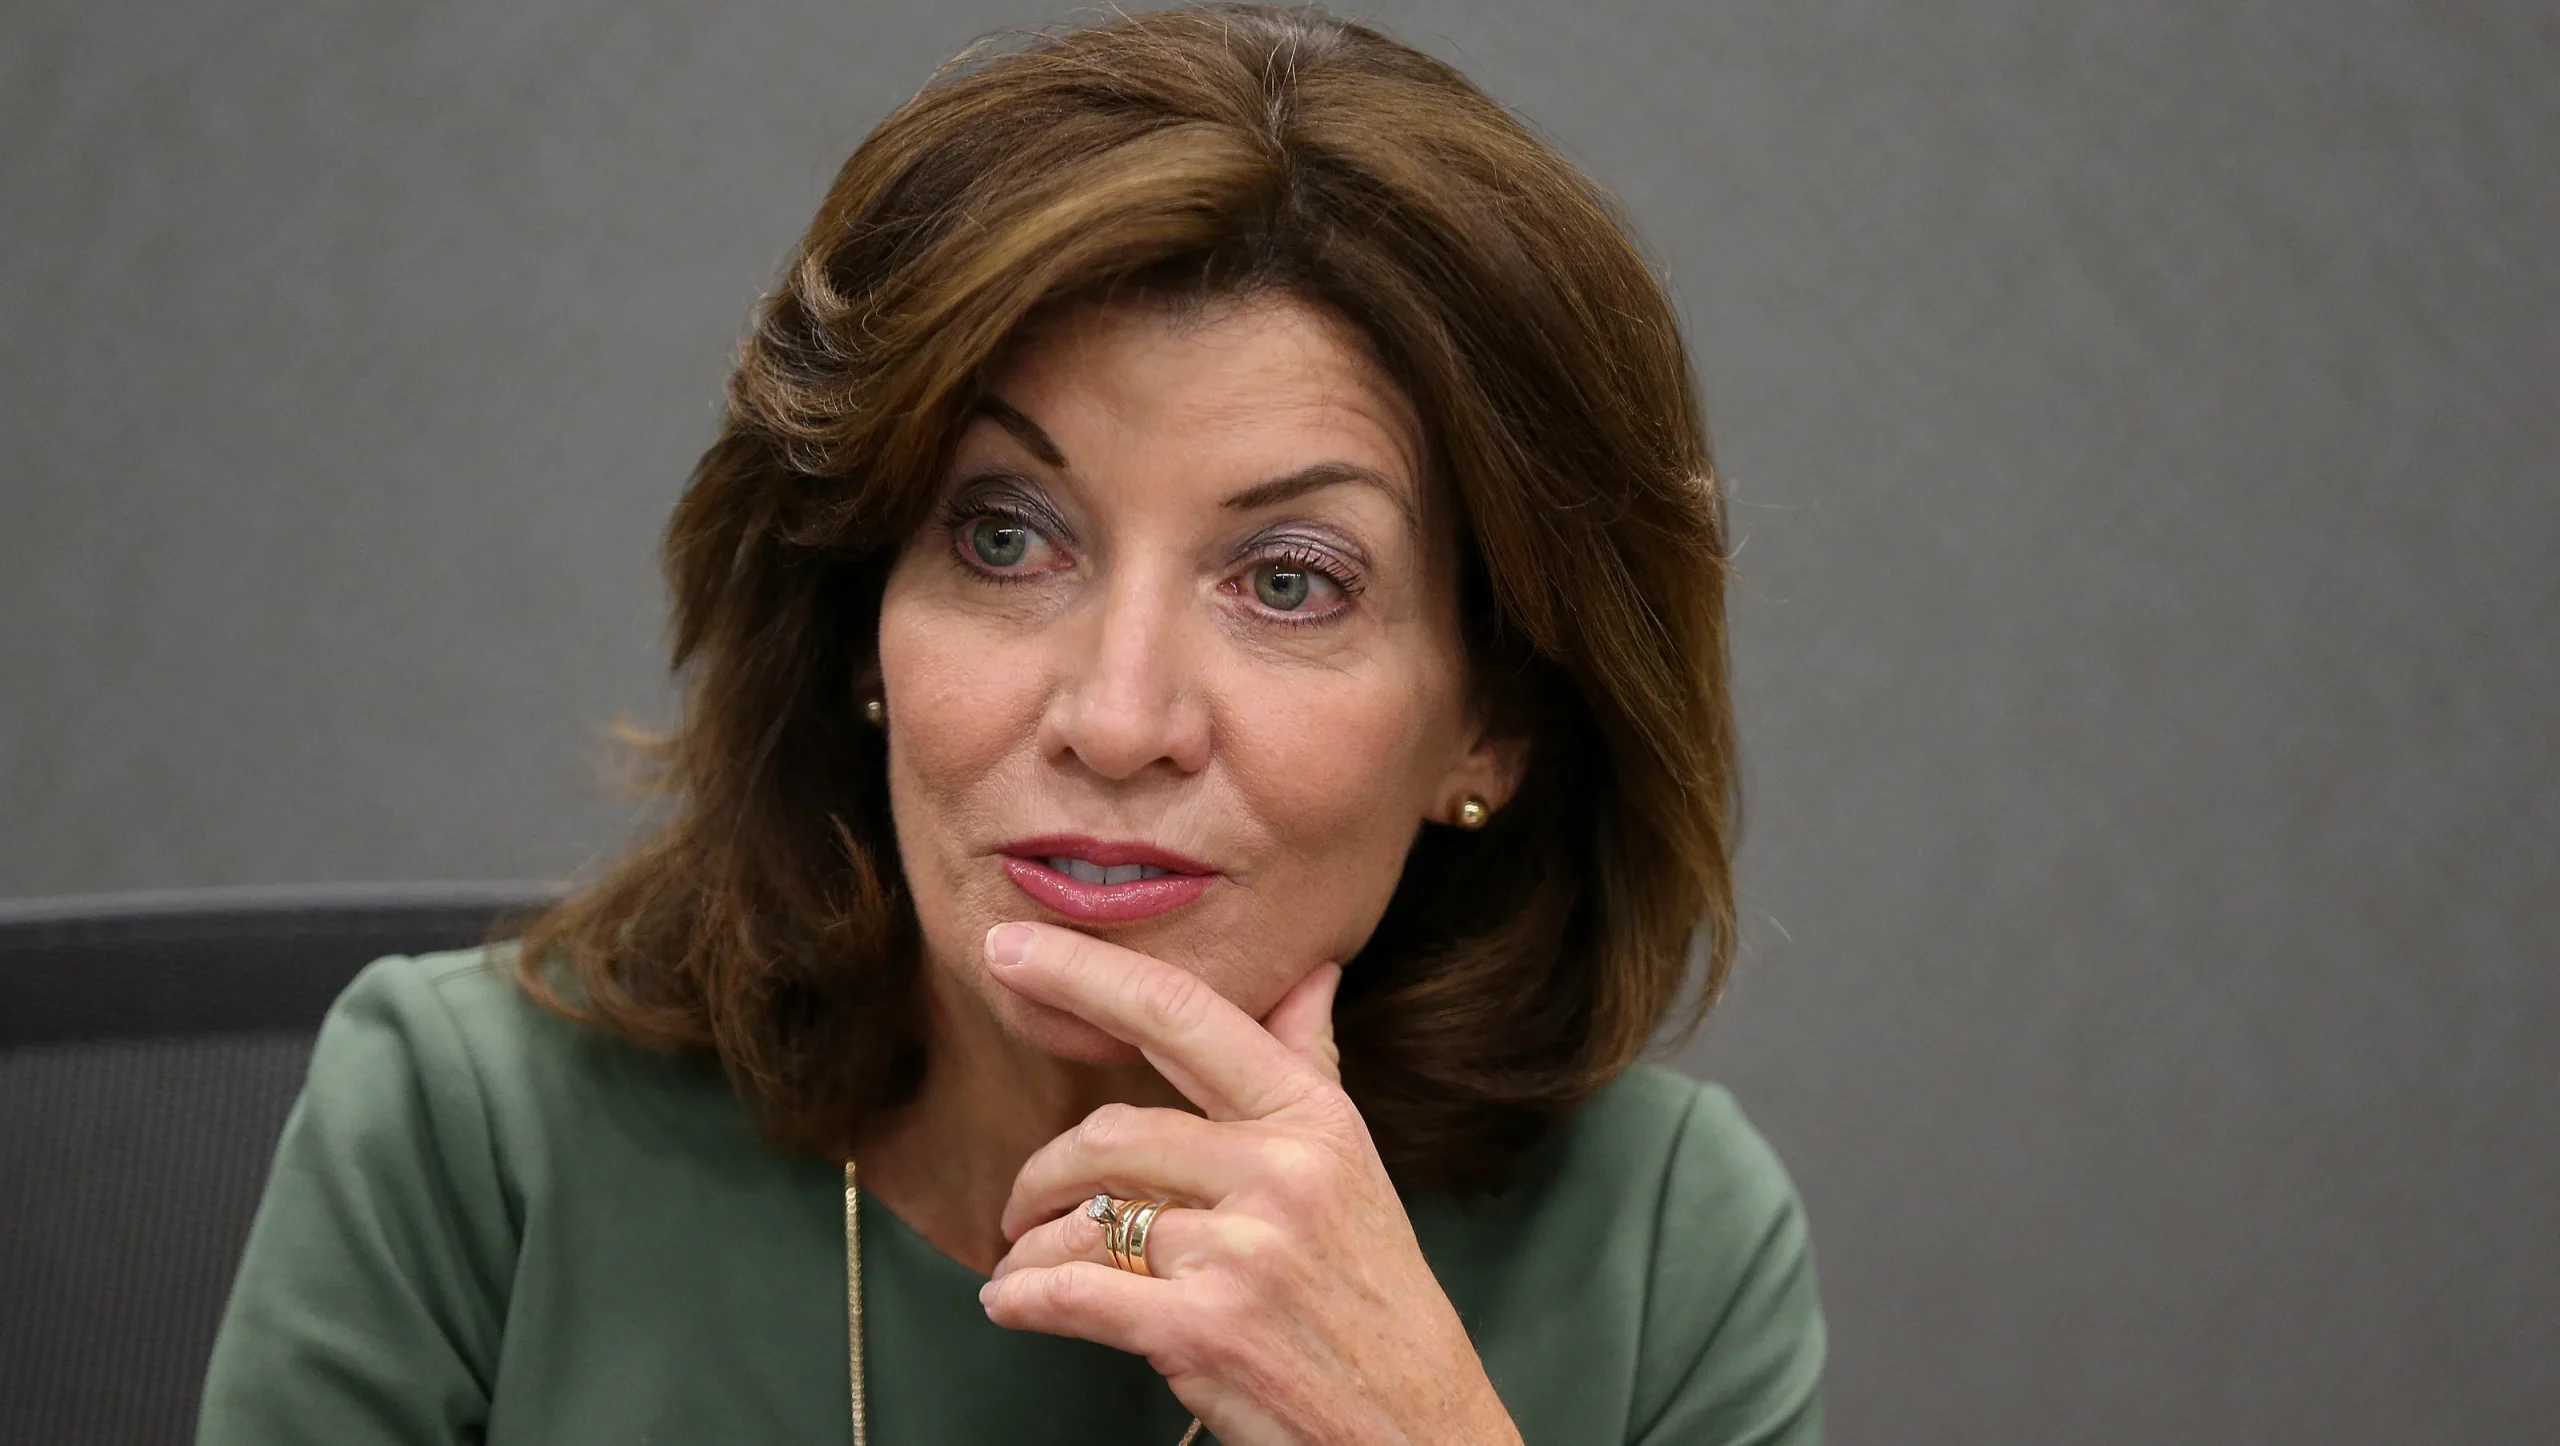 Governor Kathy Hochul has voiced her frustration with the slow pace of approving new licenses for cannabis businesses.